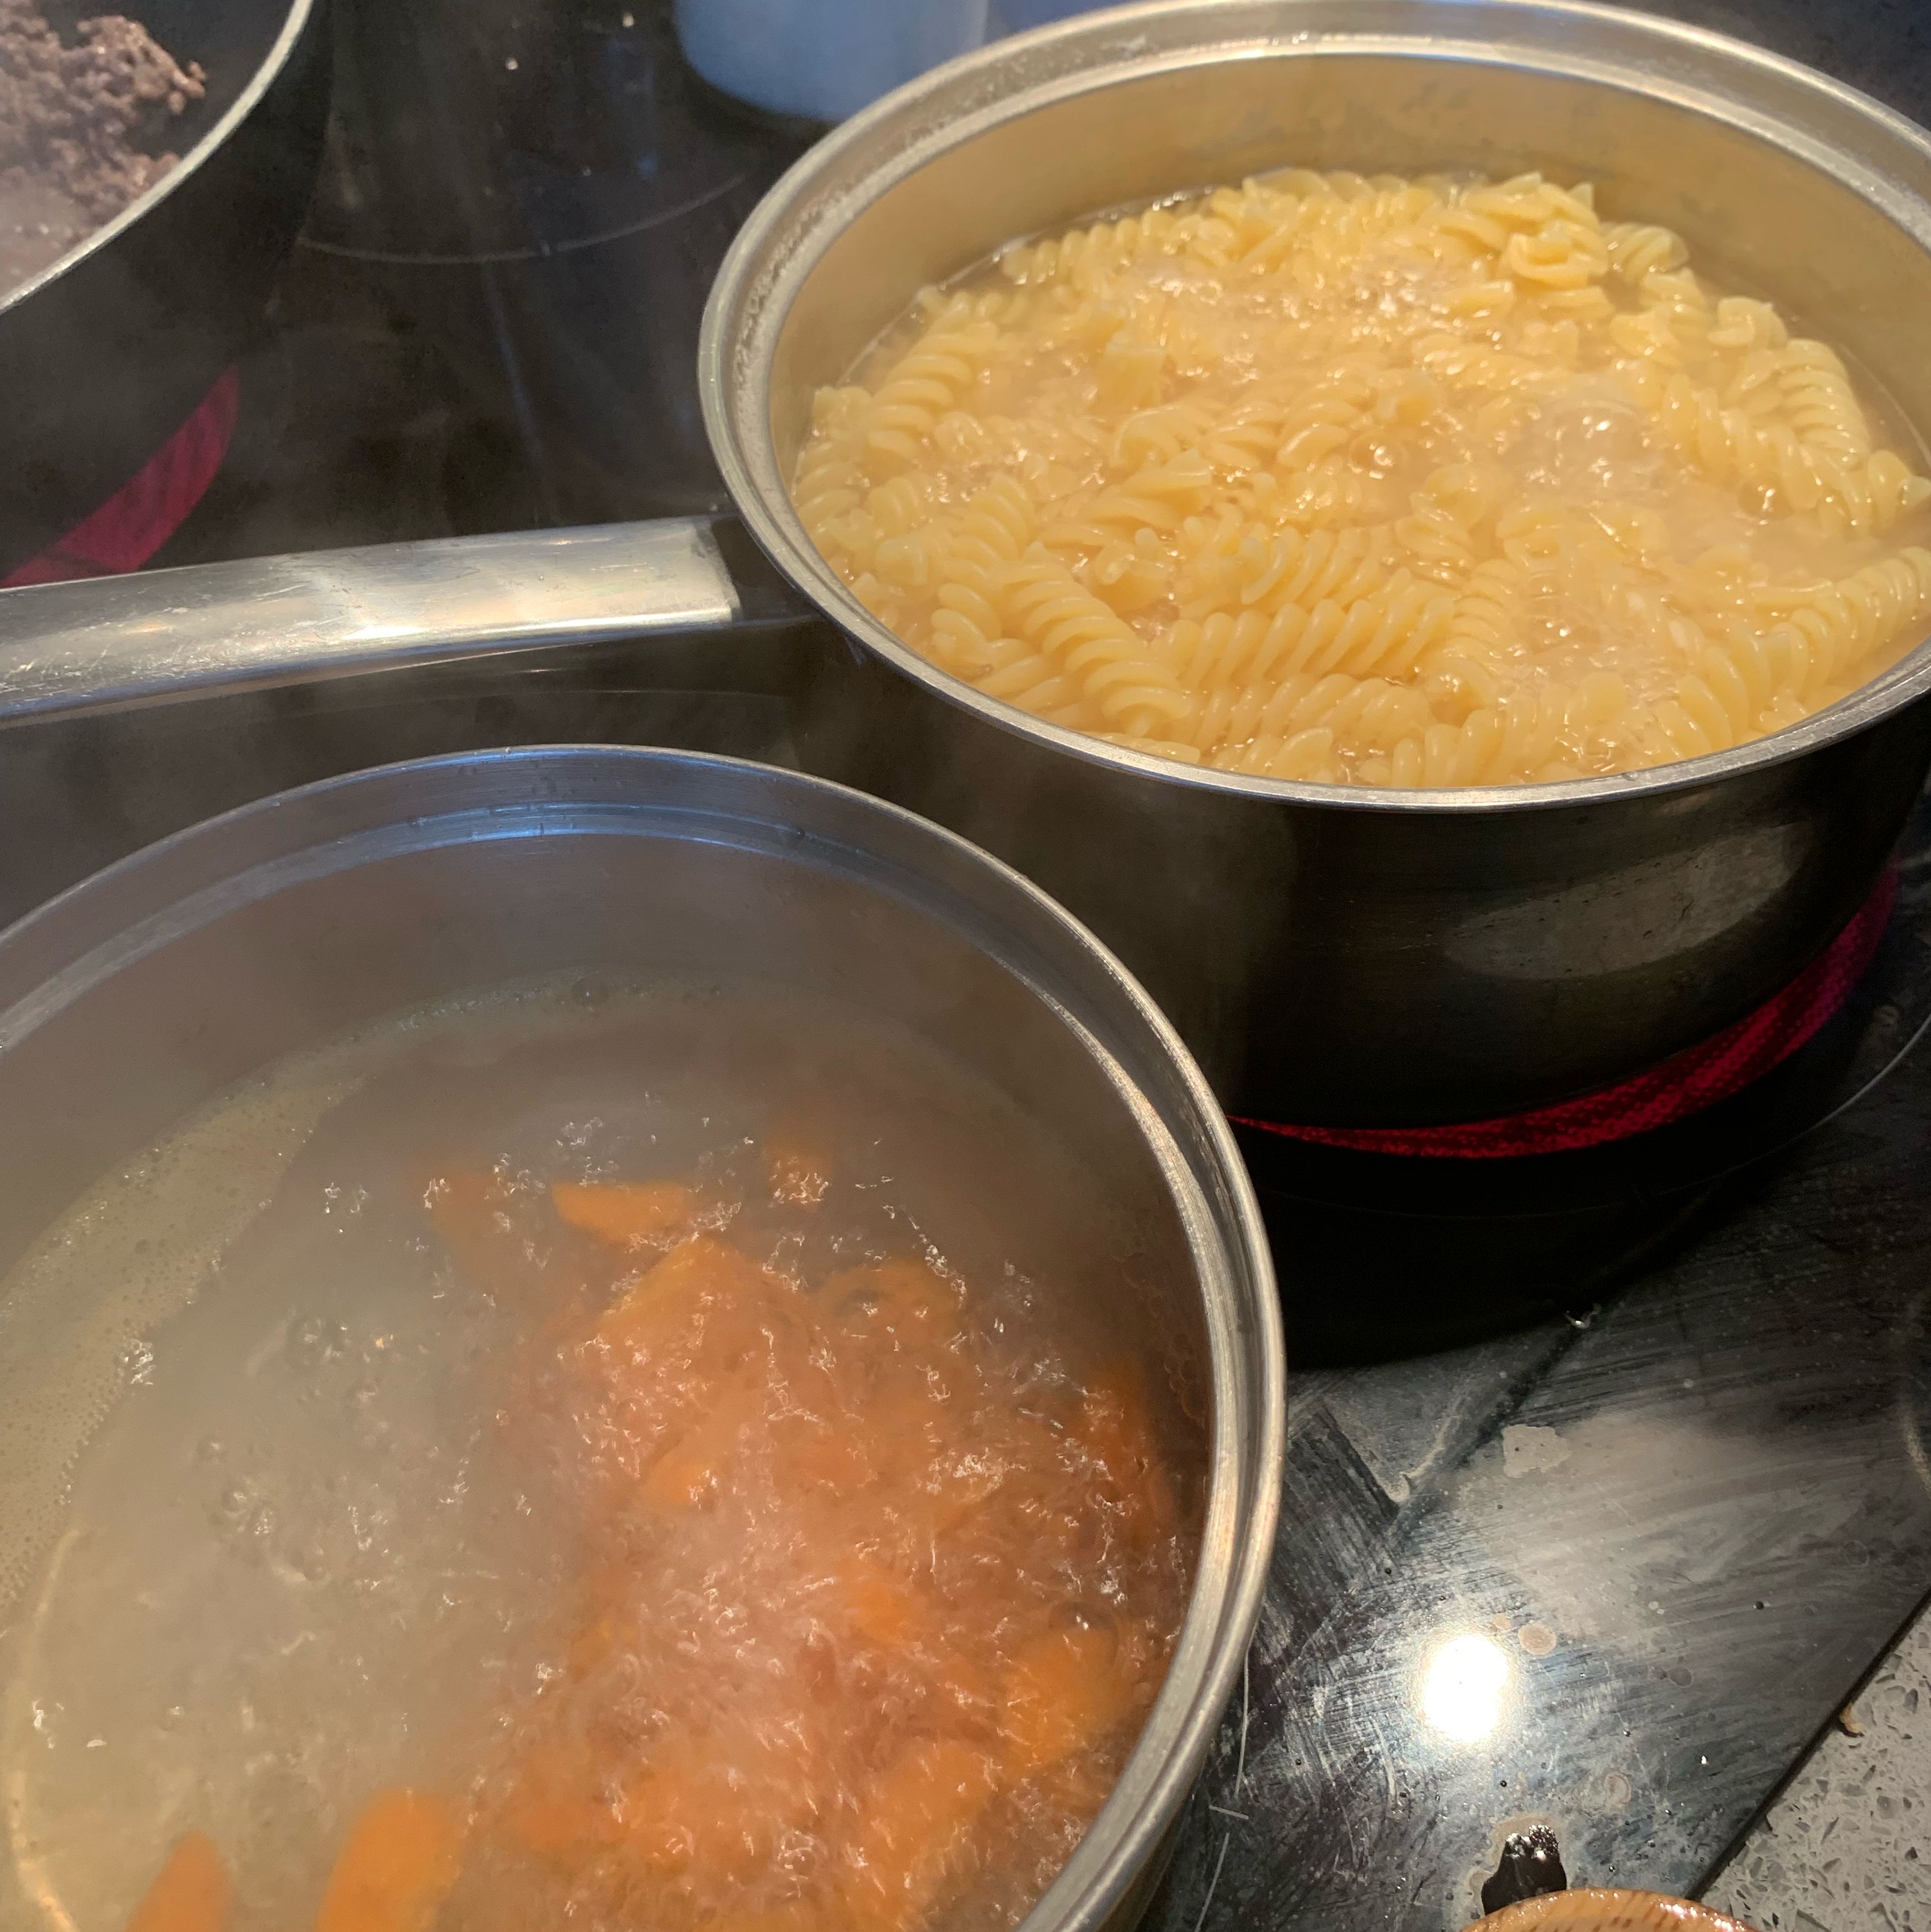 Start off by preparing your fusilli pasta and the carrots (previously cut in as large or as small pieces as you like). Boil the pasta and carrots till nice and al dente. I add a tea spoon of cooking or vegetable oil to the pasta as it prevents it from sticking to the pan.